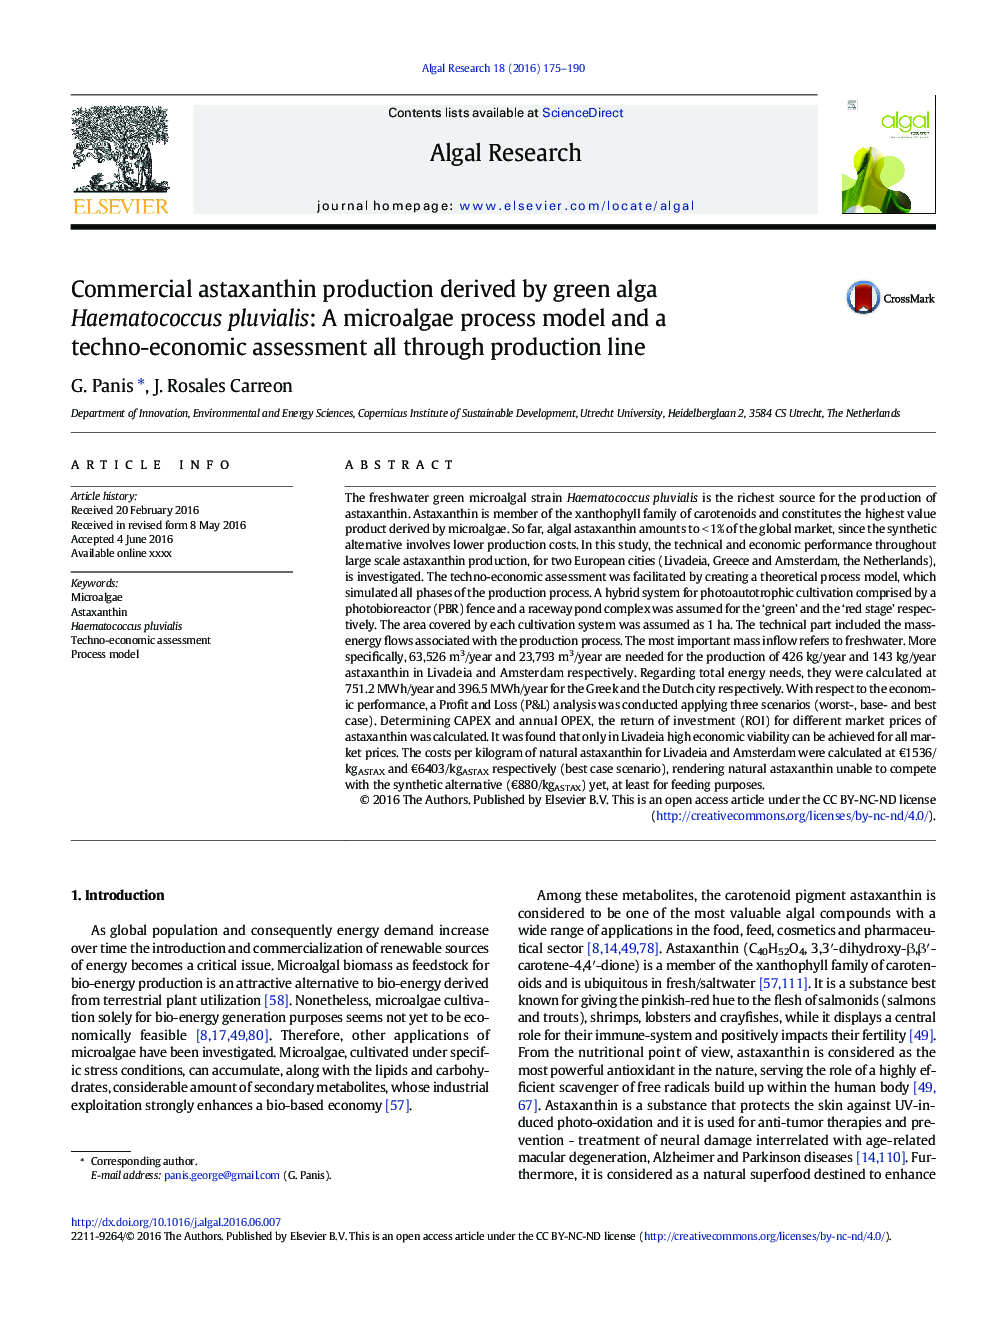 Commercial astaxanthin production derived by green alga Haematococcus pluvialis: A microalgae process model and a techno-economic assessment all through production line